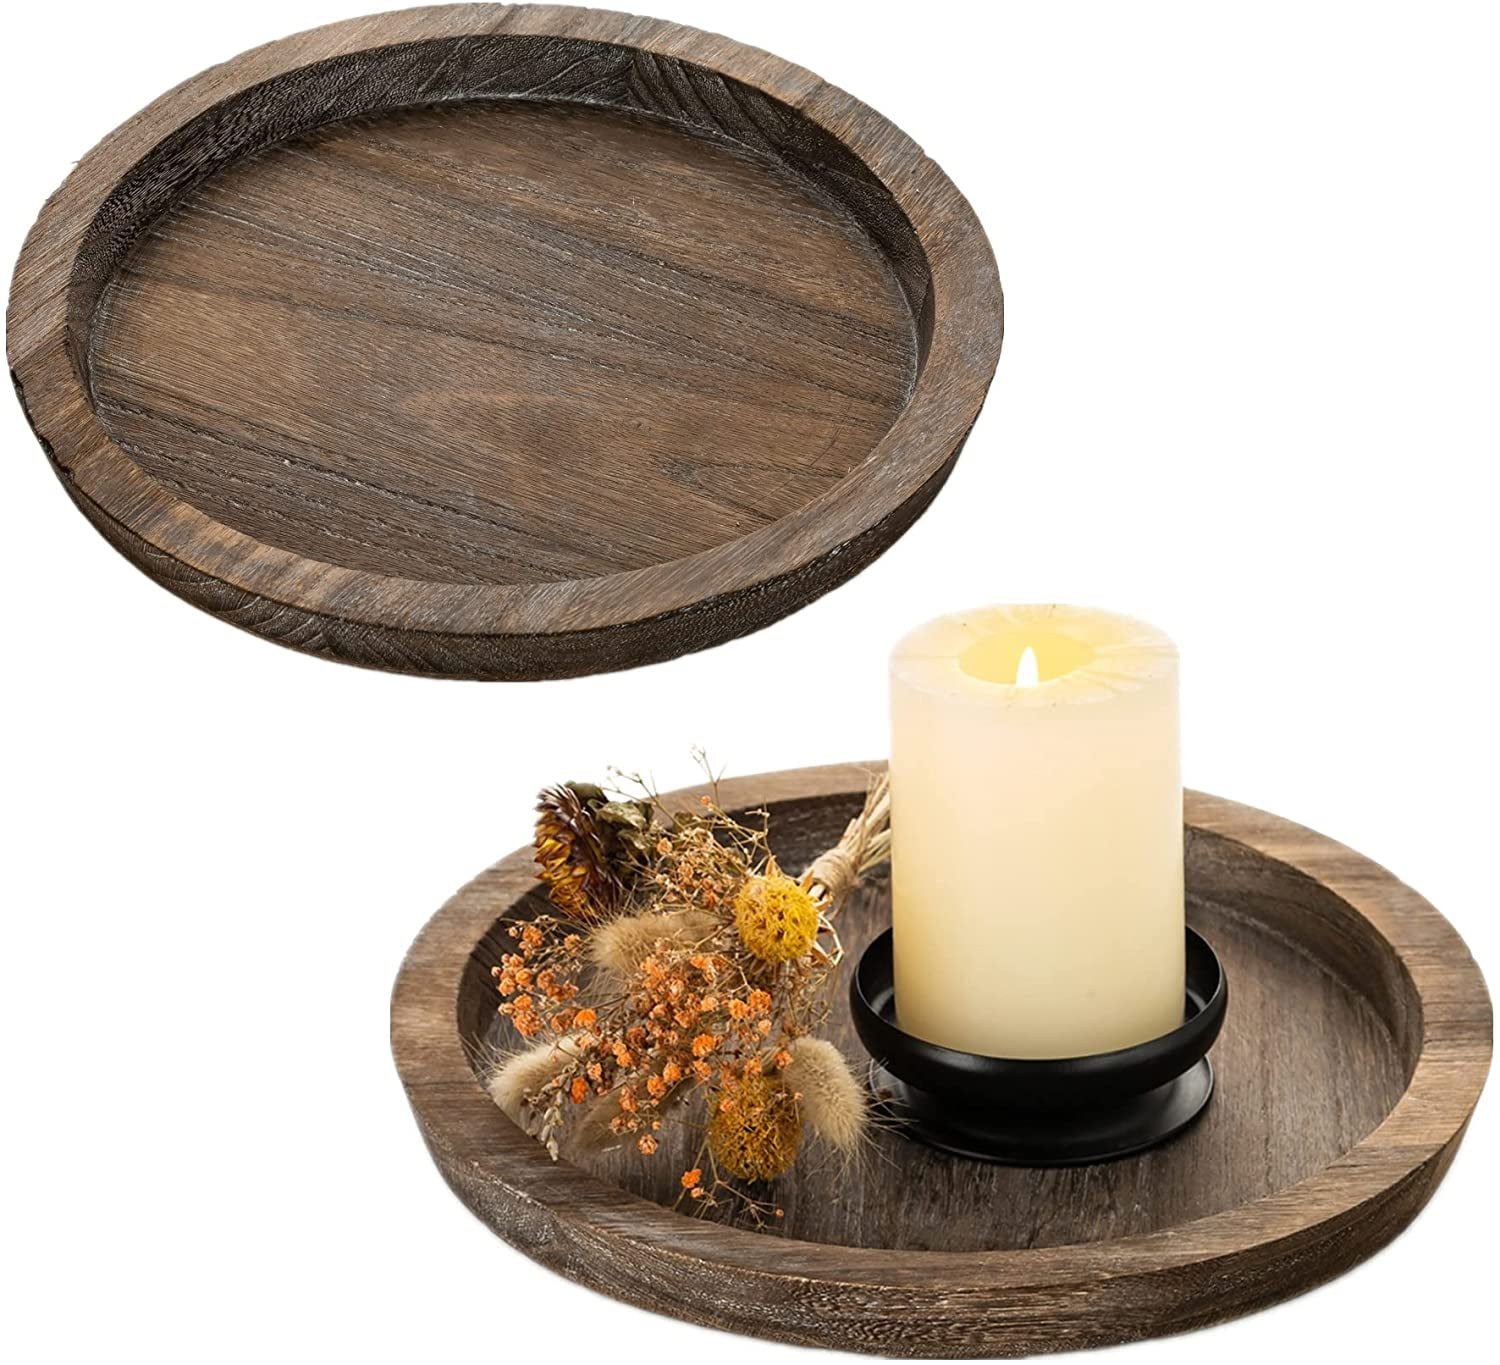 TERRA HOME Candle Holder Centerpiece Coffee Table Decor Decorative Candle Centerpiece with Rustic Wooden Tray and Metal Plate Candle Holders Vintage Look Centerpieces for Dining Room Table 